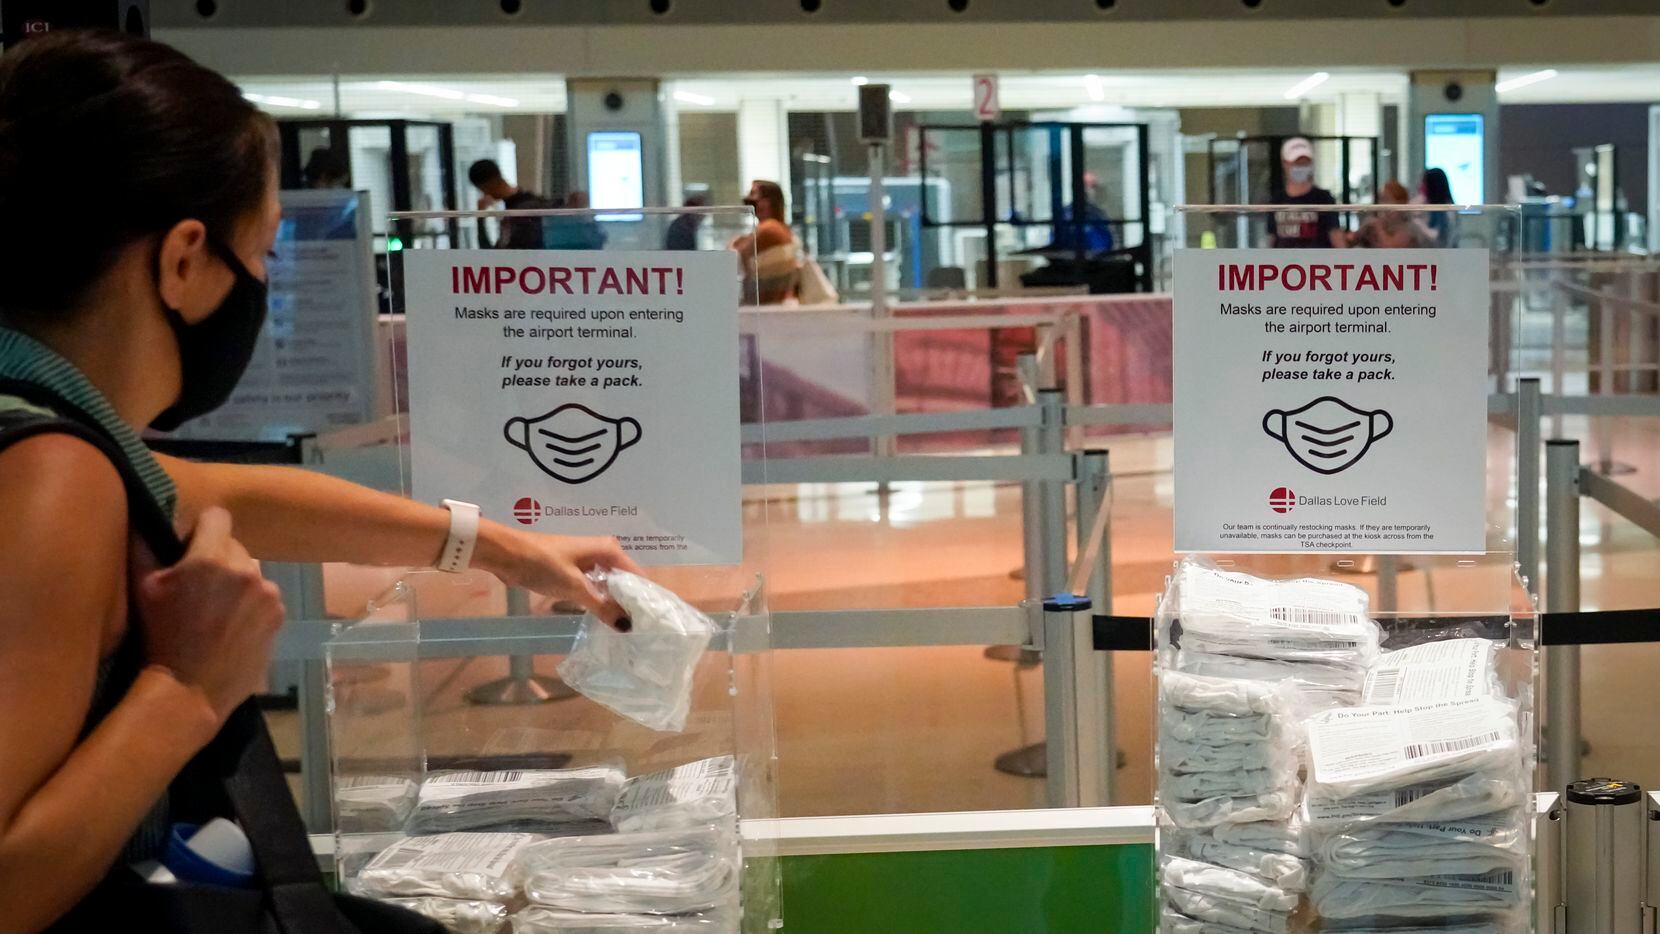 A passenger grabs a free mask before entering the security checkpoint at Dallas Love Field.